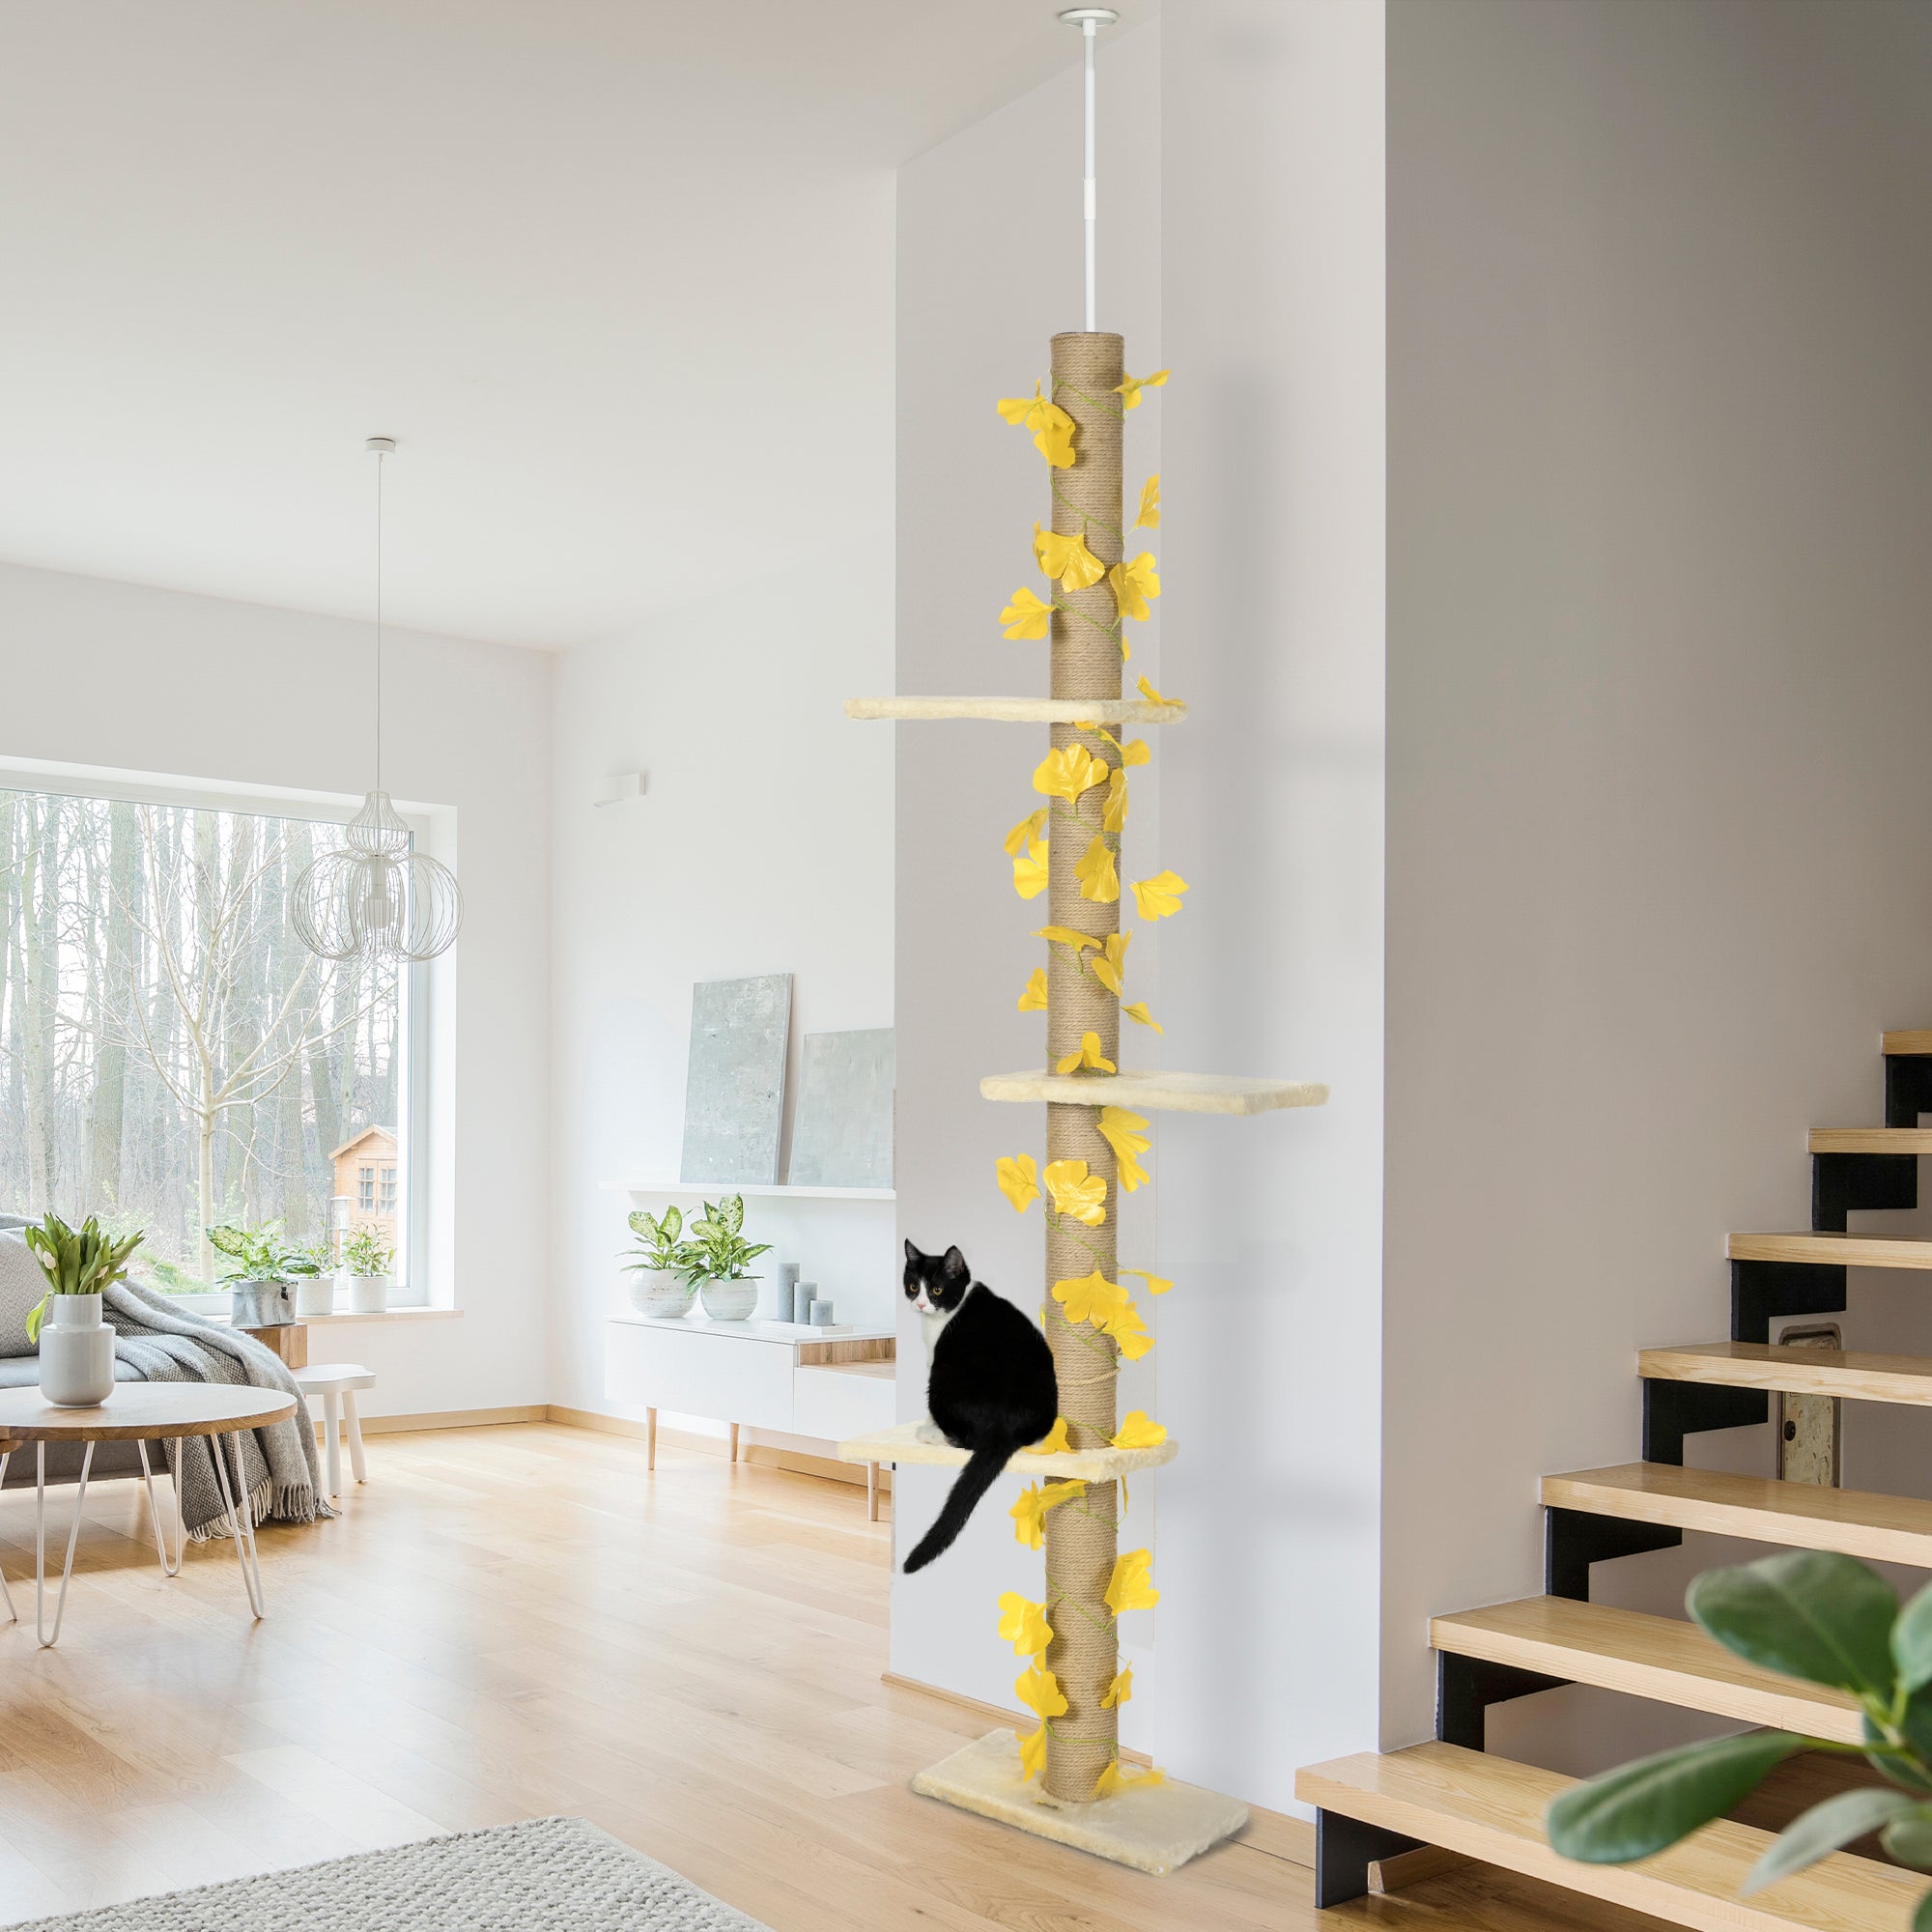 PawHut 202-242cm Height Adjustable Floor to Ceiling Cat Tree for Indoor Cats with Sisal Scratching Post, 3- Tier Cat Tower Climbing Activity Centre with Platforms, Leaves, Yellow